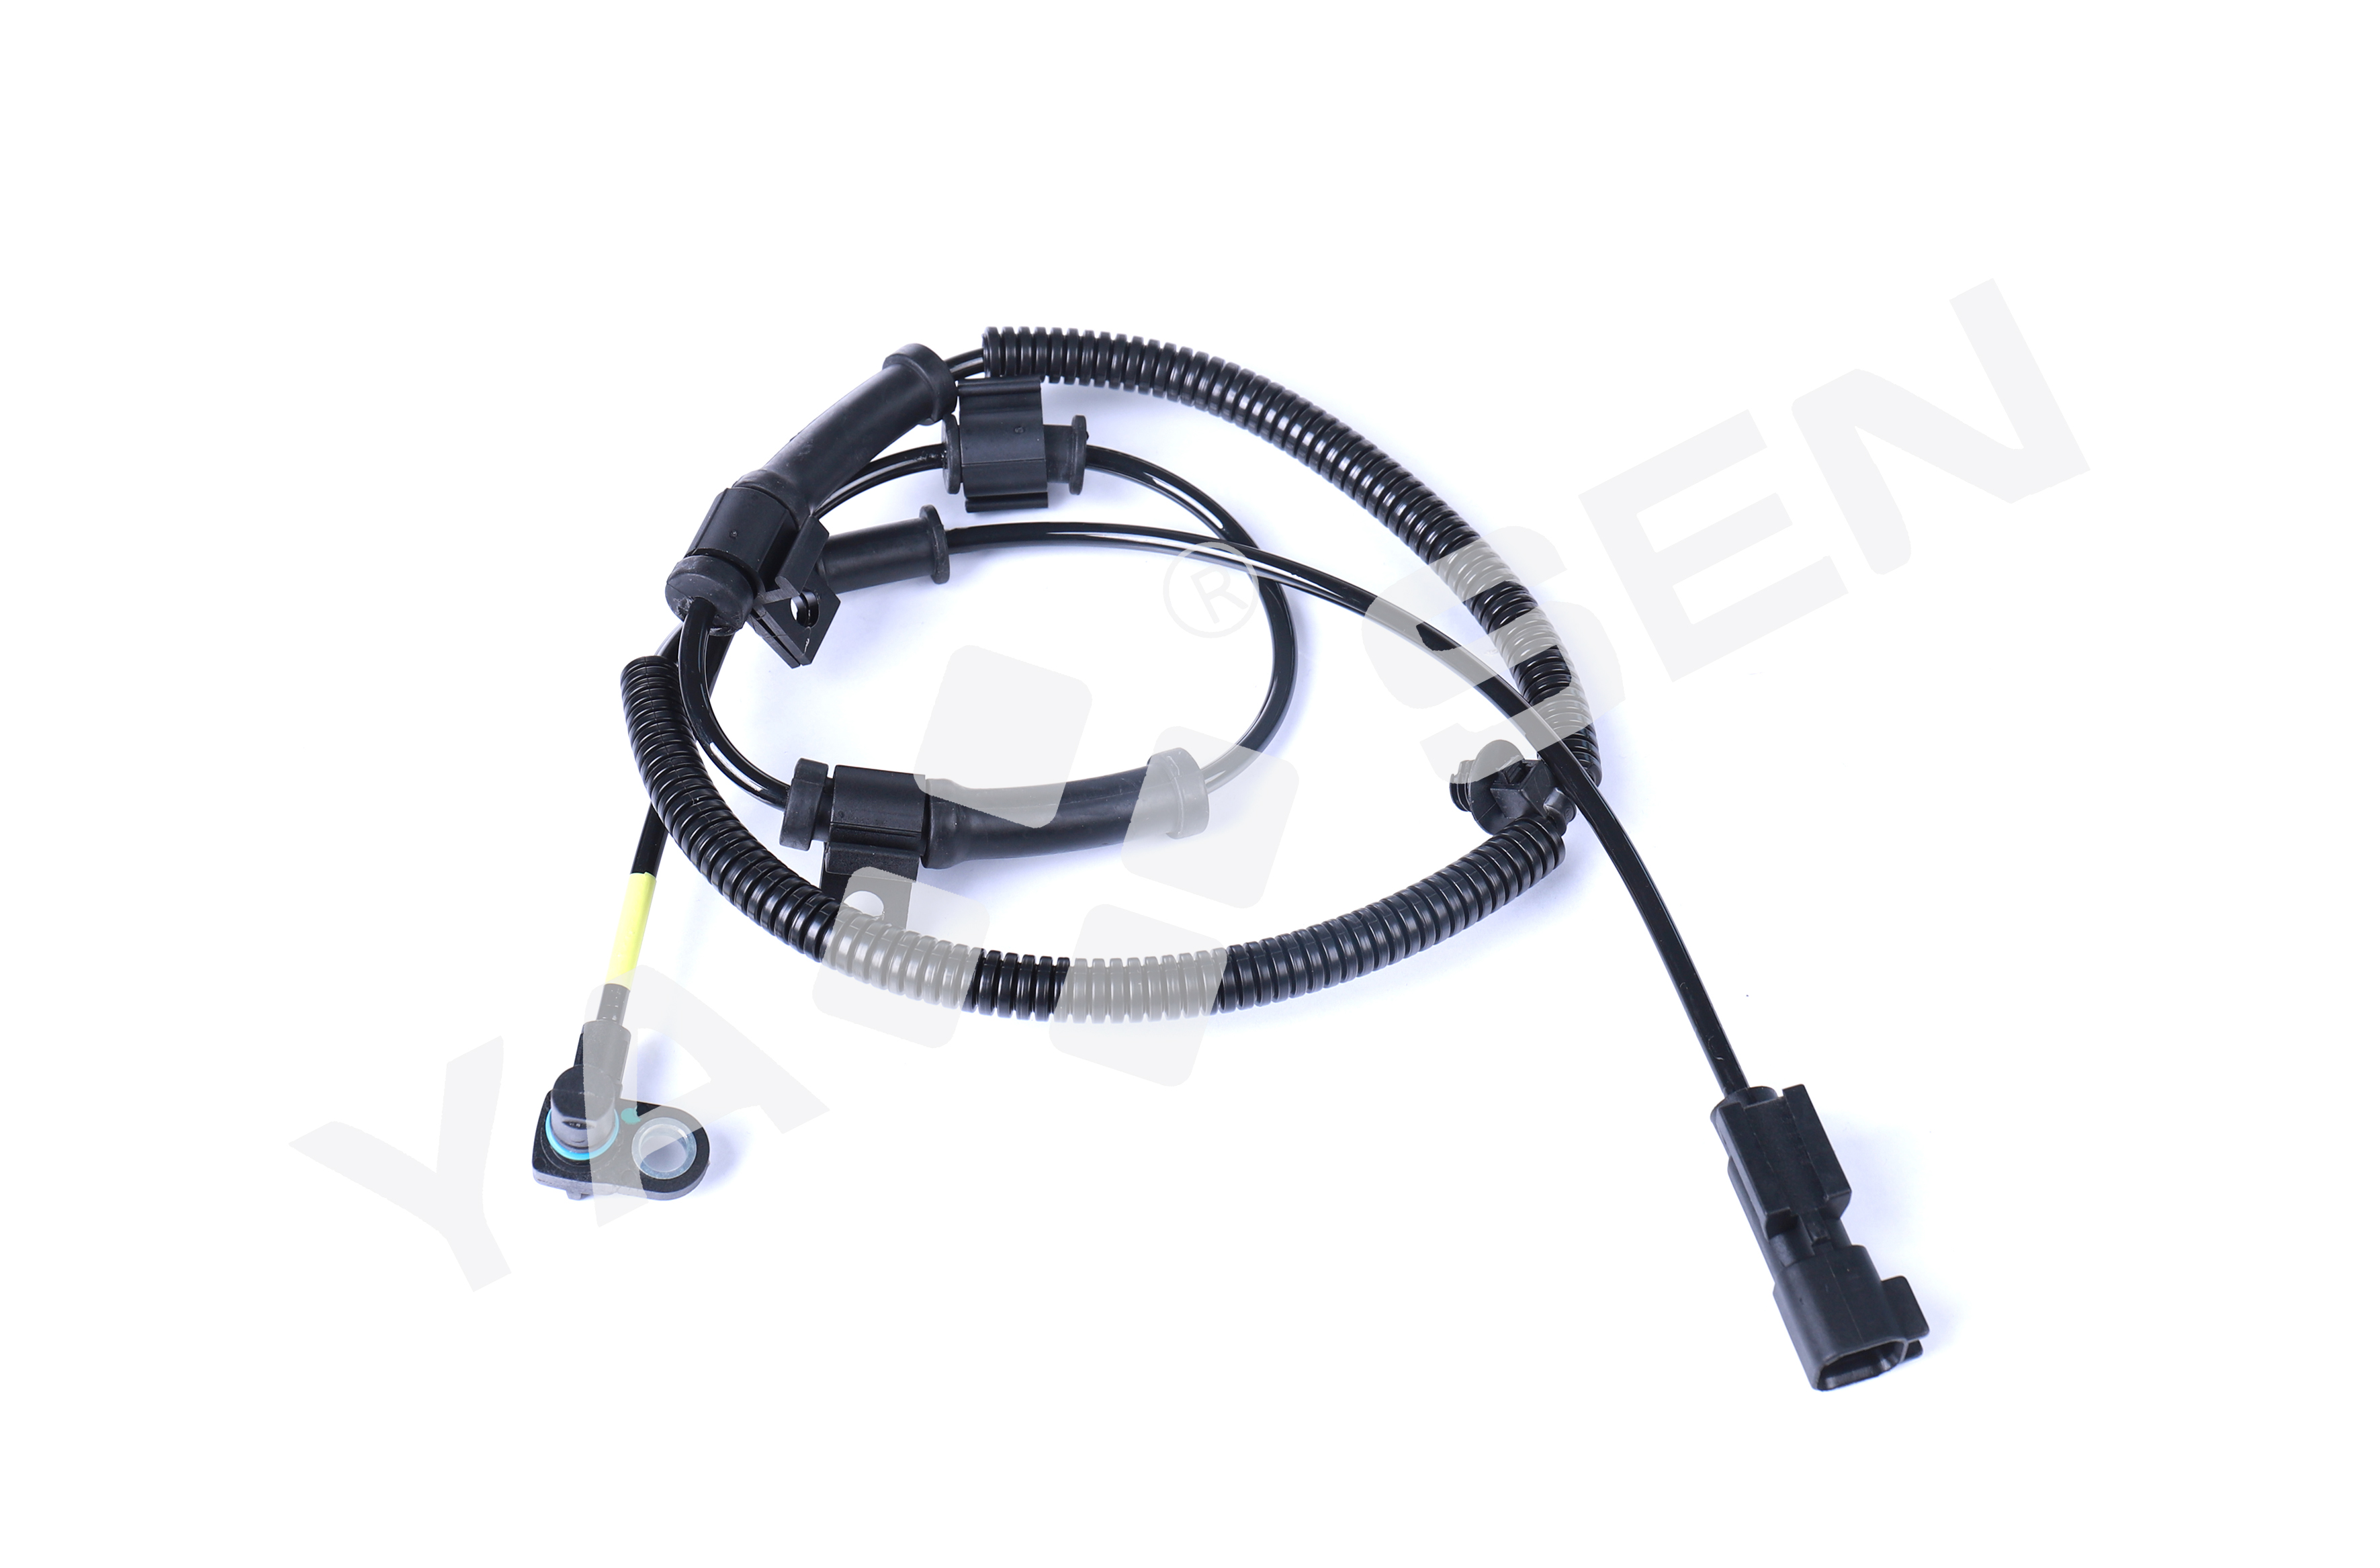 ABS Wheel Speed Sensor for FORD/DODGE, BC3Z-2C204B SU13763 1802-559037 72-10954 5S12345 ABS2314 8511906040 BC3Z2C204B